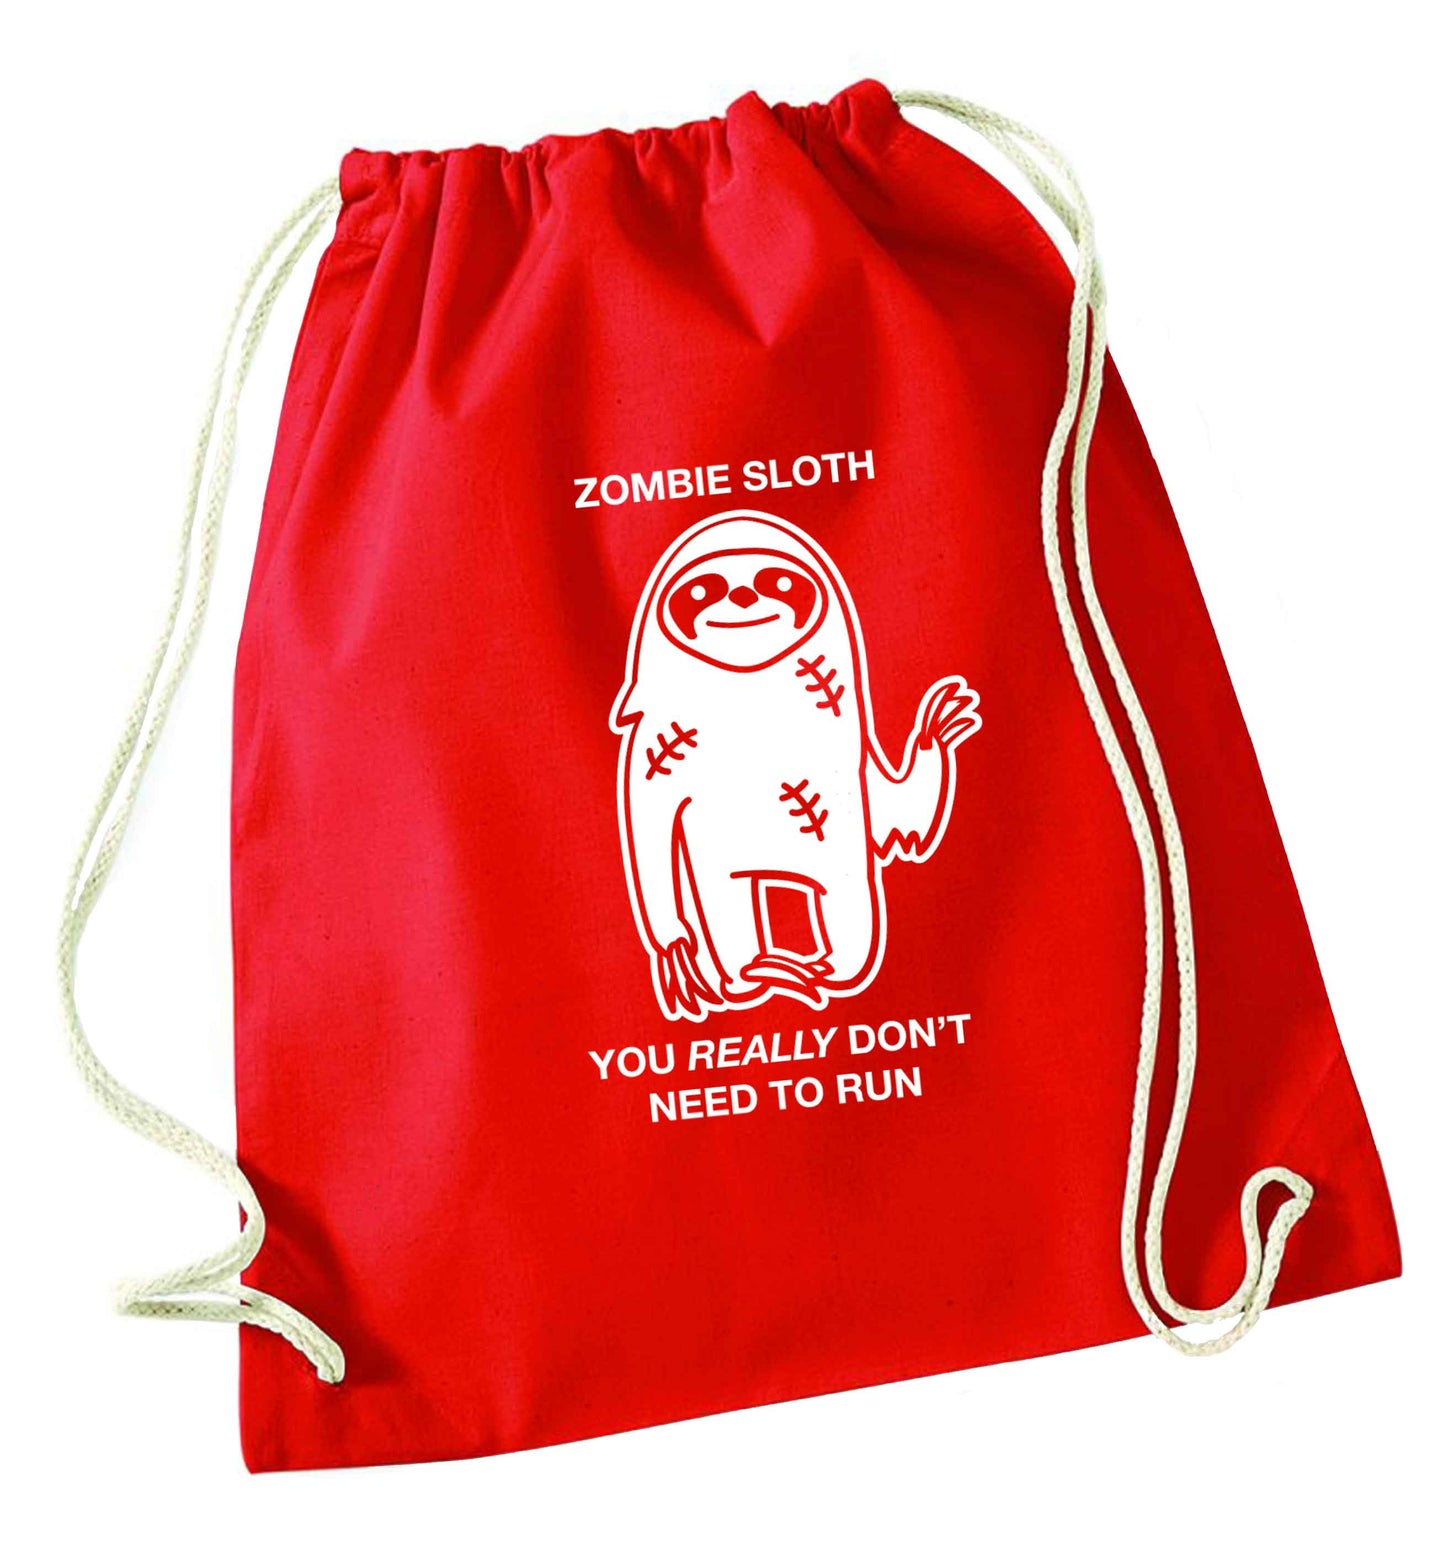 Zombie sloth you really don't need to run red drawstring bag 